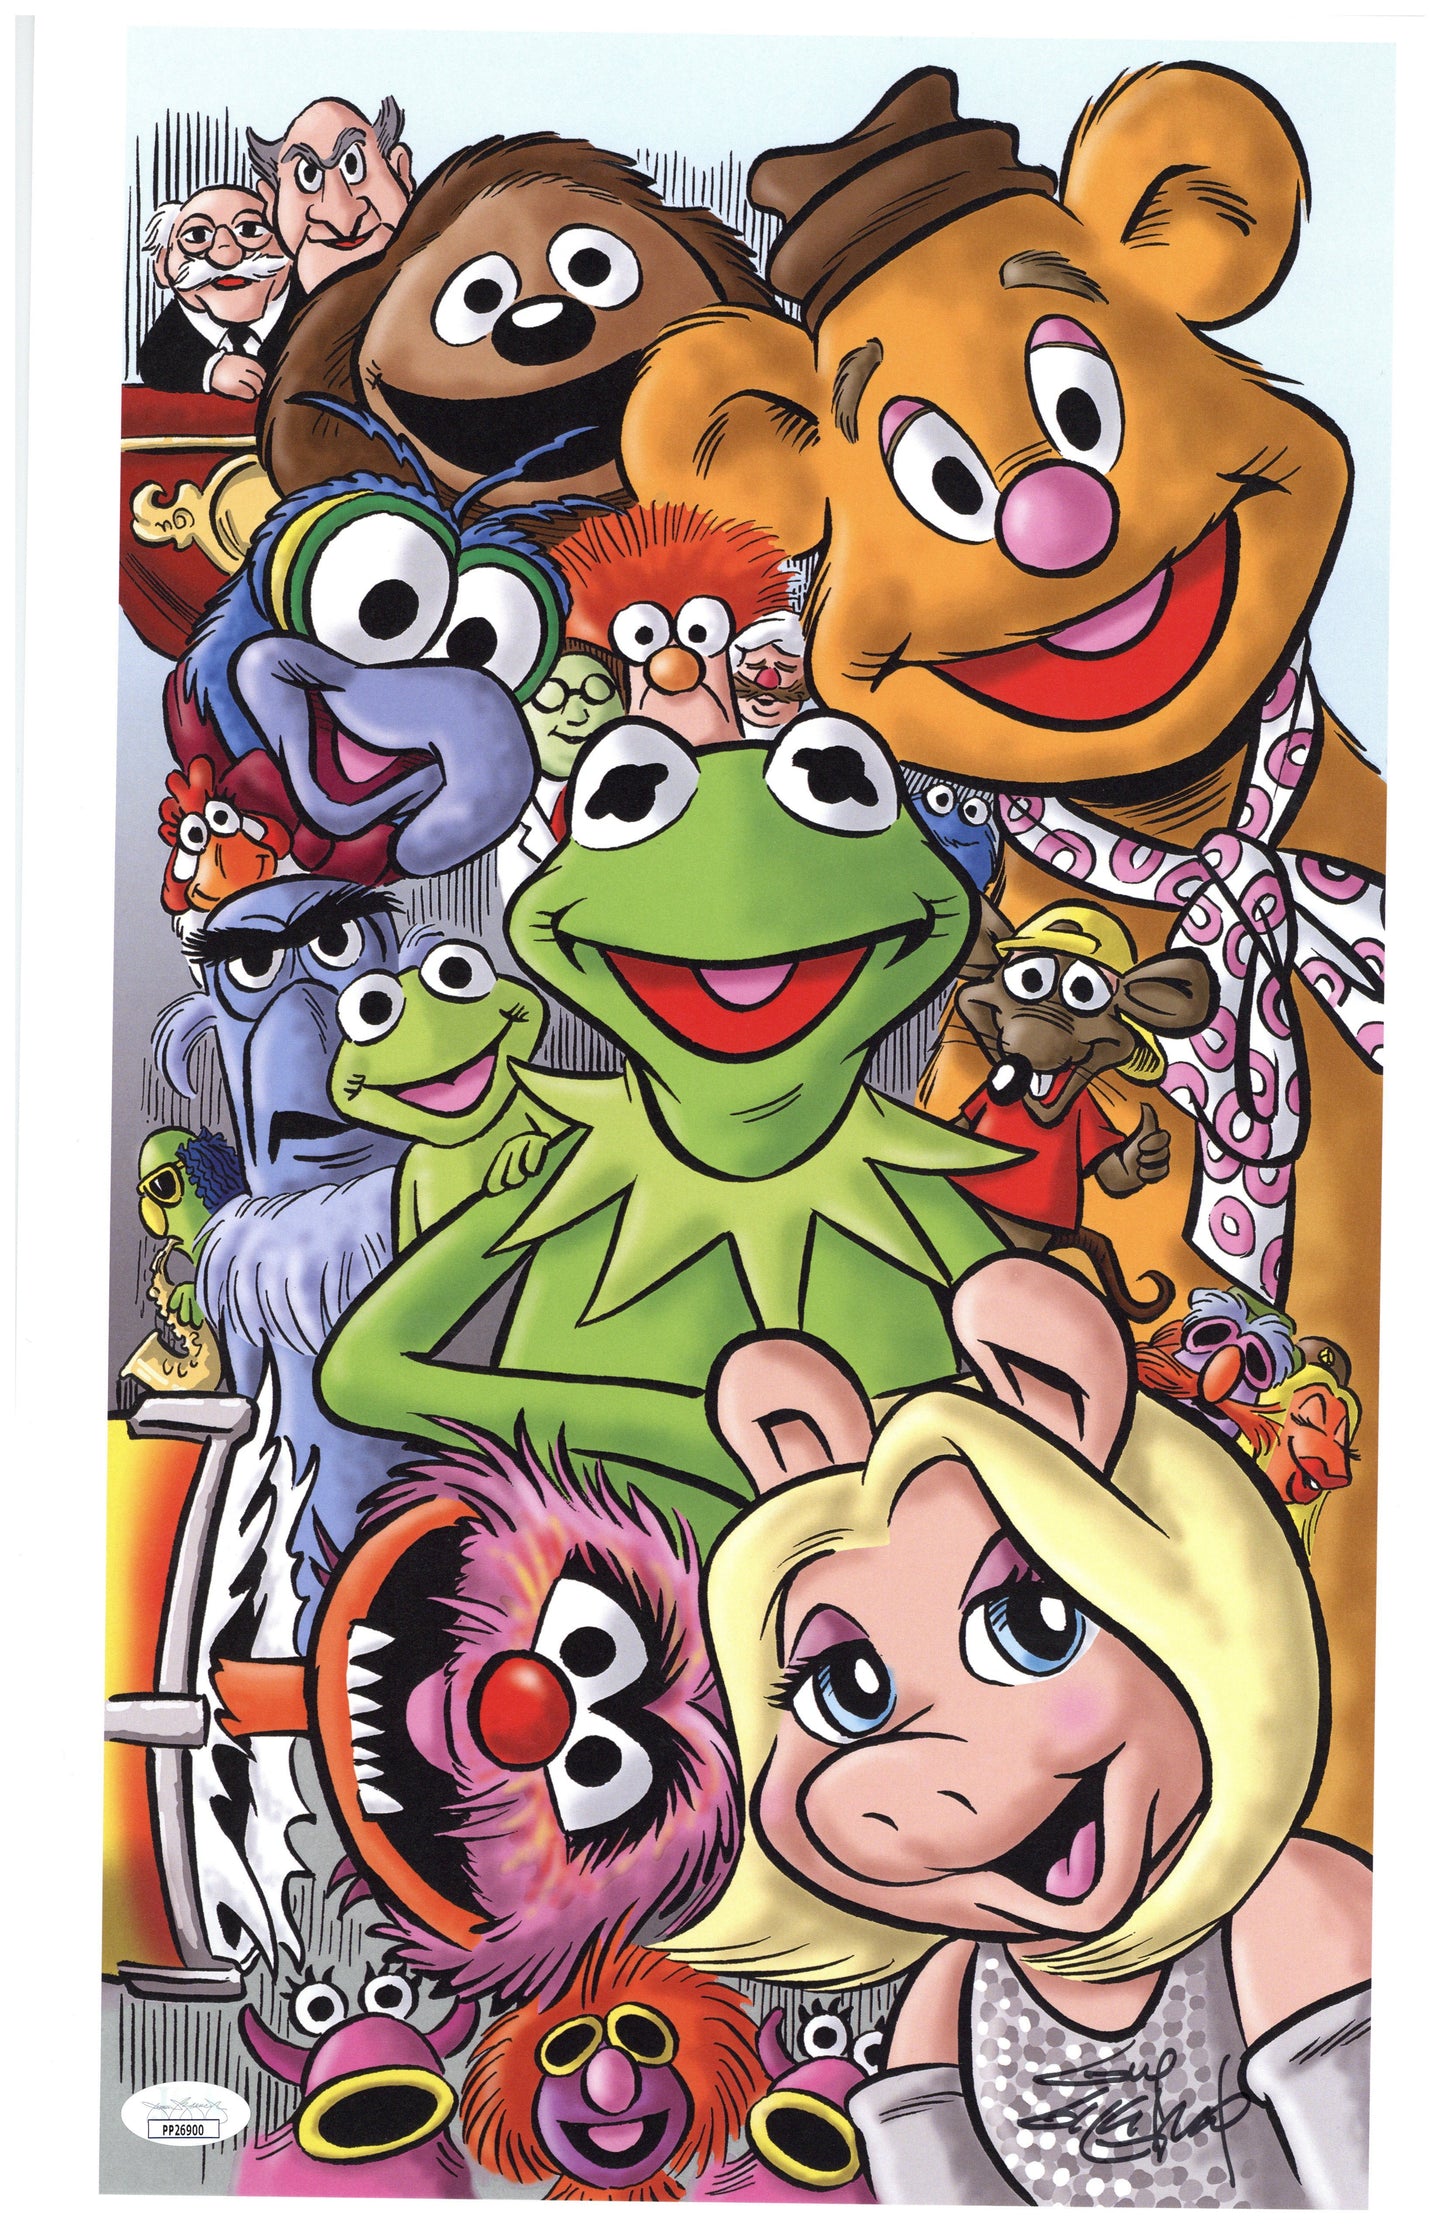 Muppets 11x17 Art Print - Created by & Signed by Guy Gilchrist - Includes JSA COA